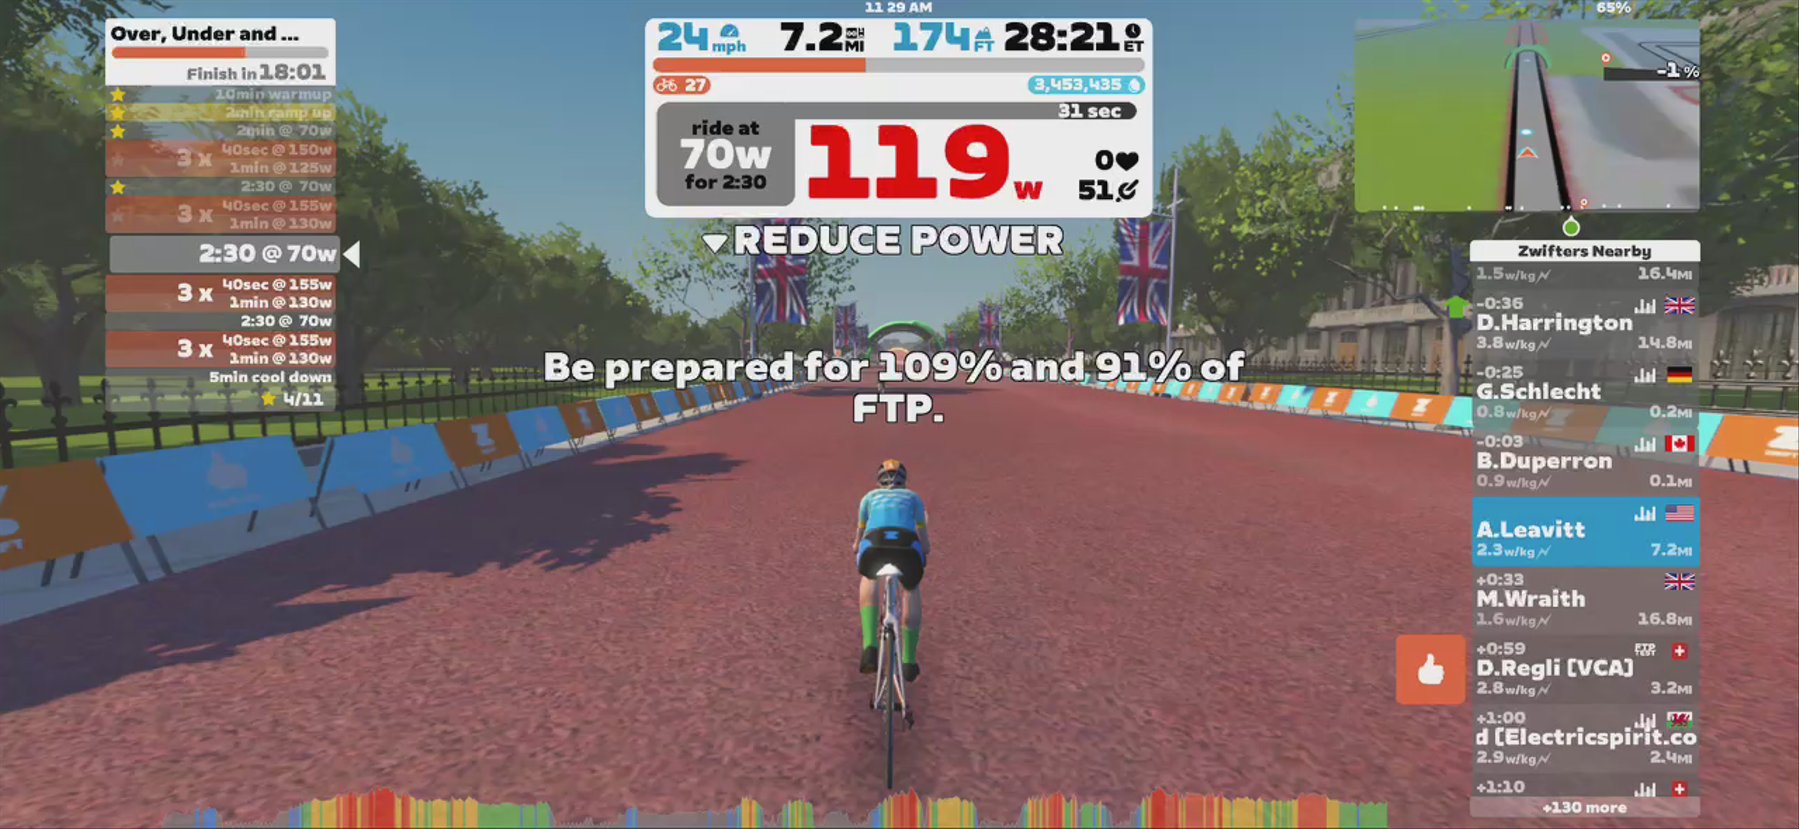 Zwift - Over, Under and Beyond in London